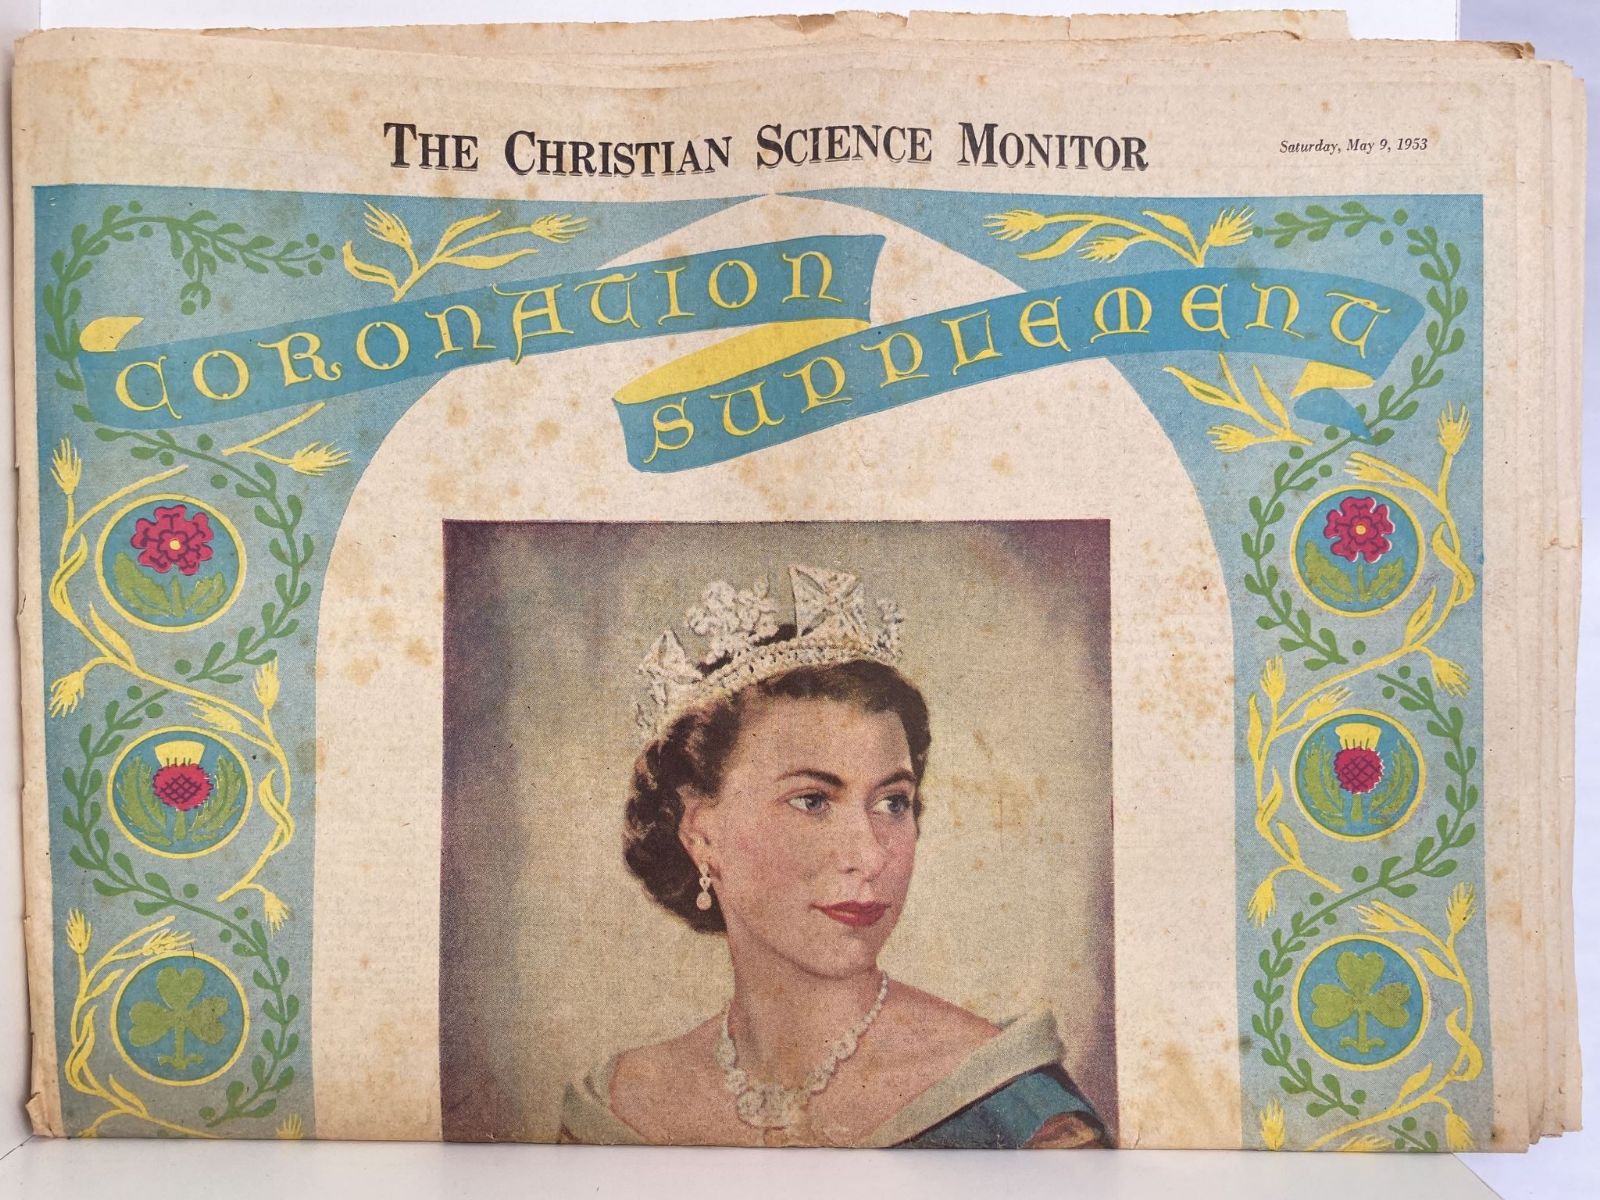 OLD NEWSPAPER: The Christian Science Monitor, 9 May 1953 - Queen's Coronation